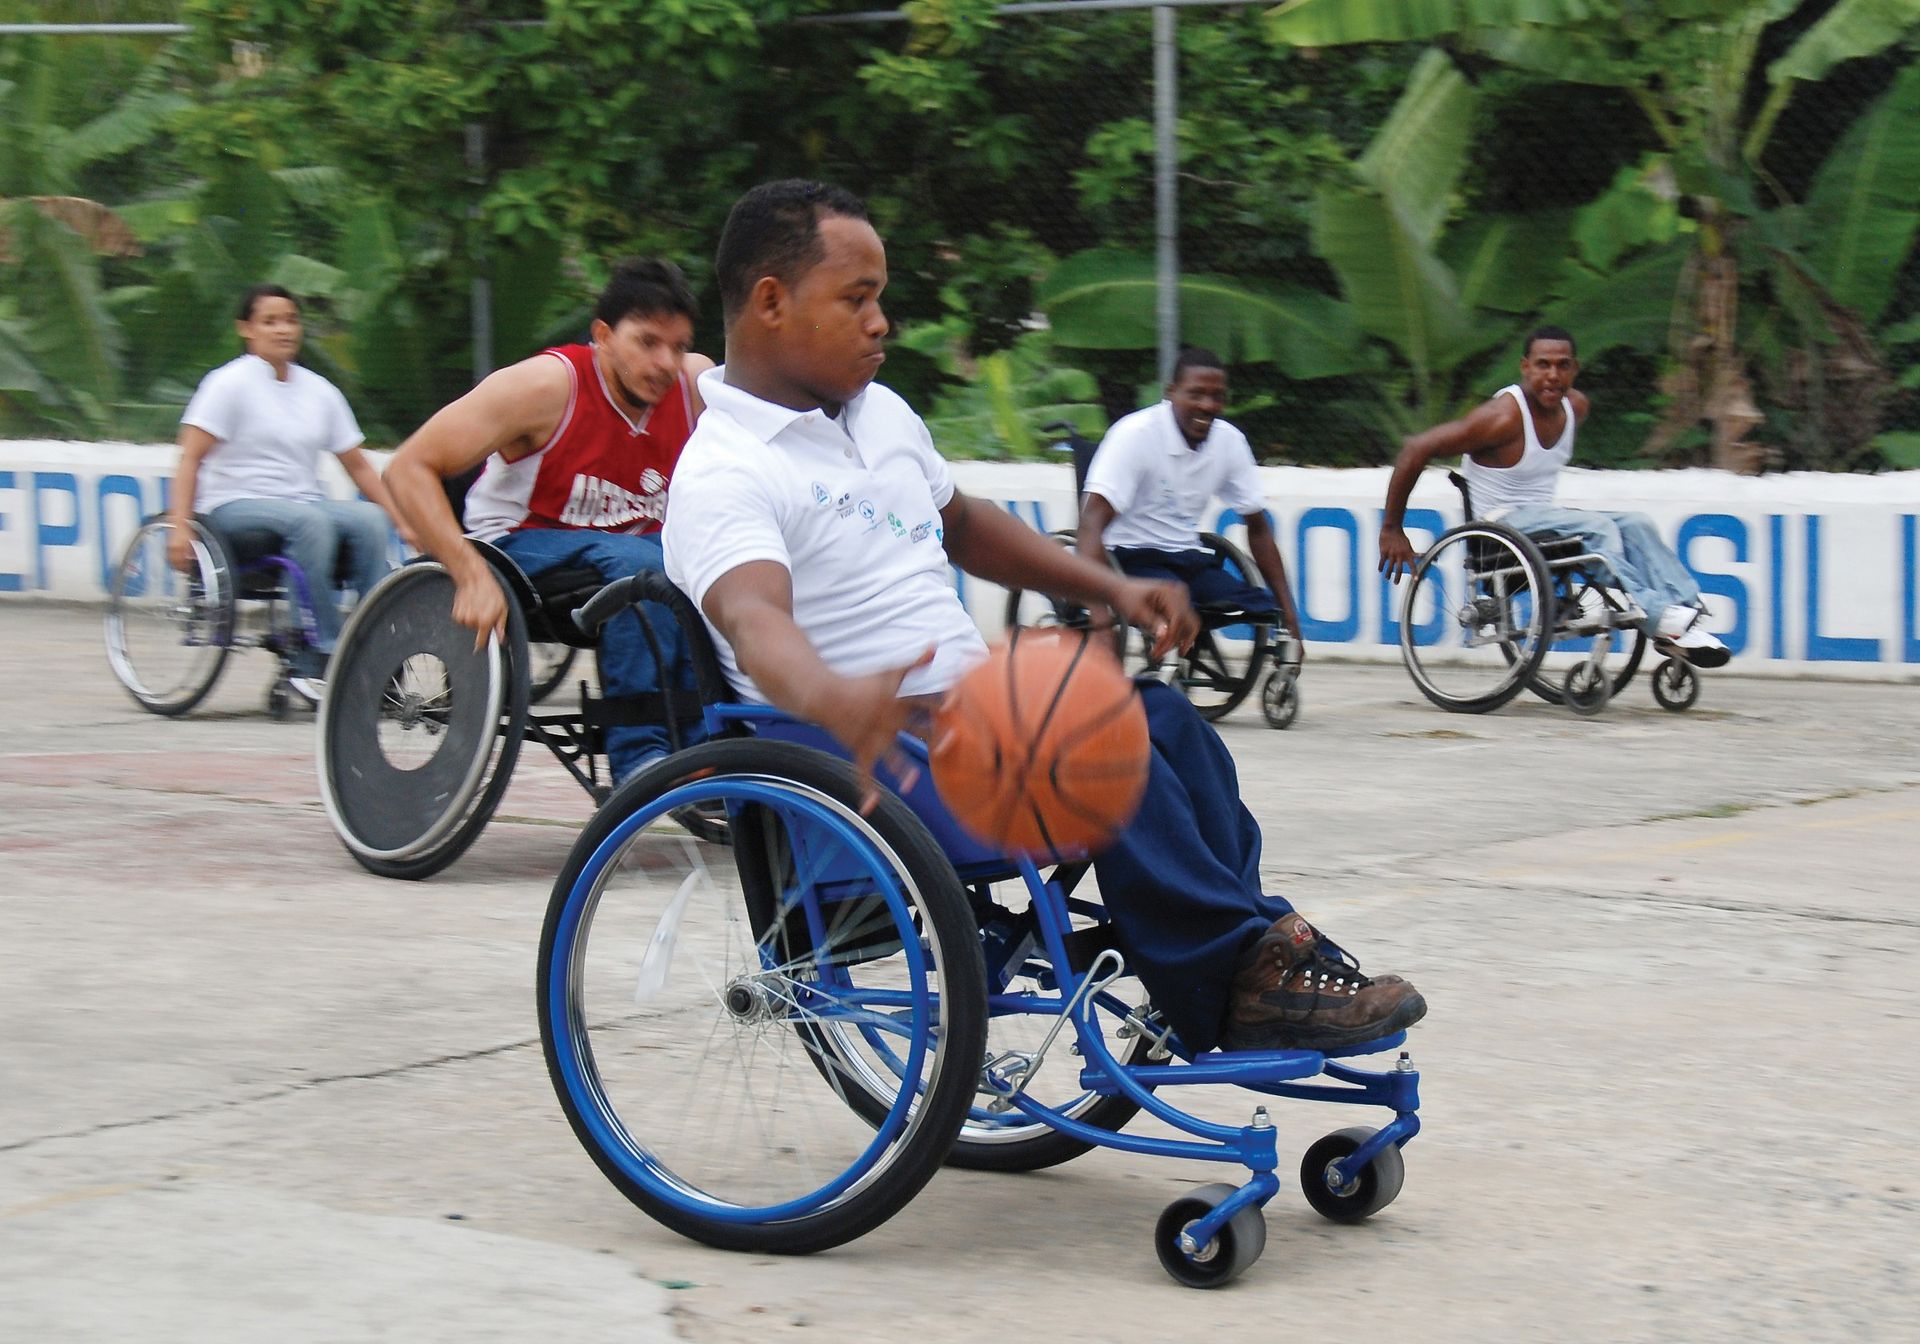 A man in a wheelchair bouncing a basketball with four men and one woman in wheelchairs on a basketball court.